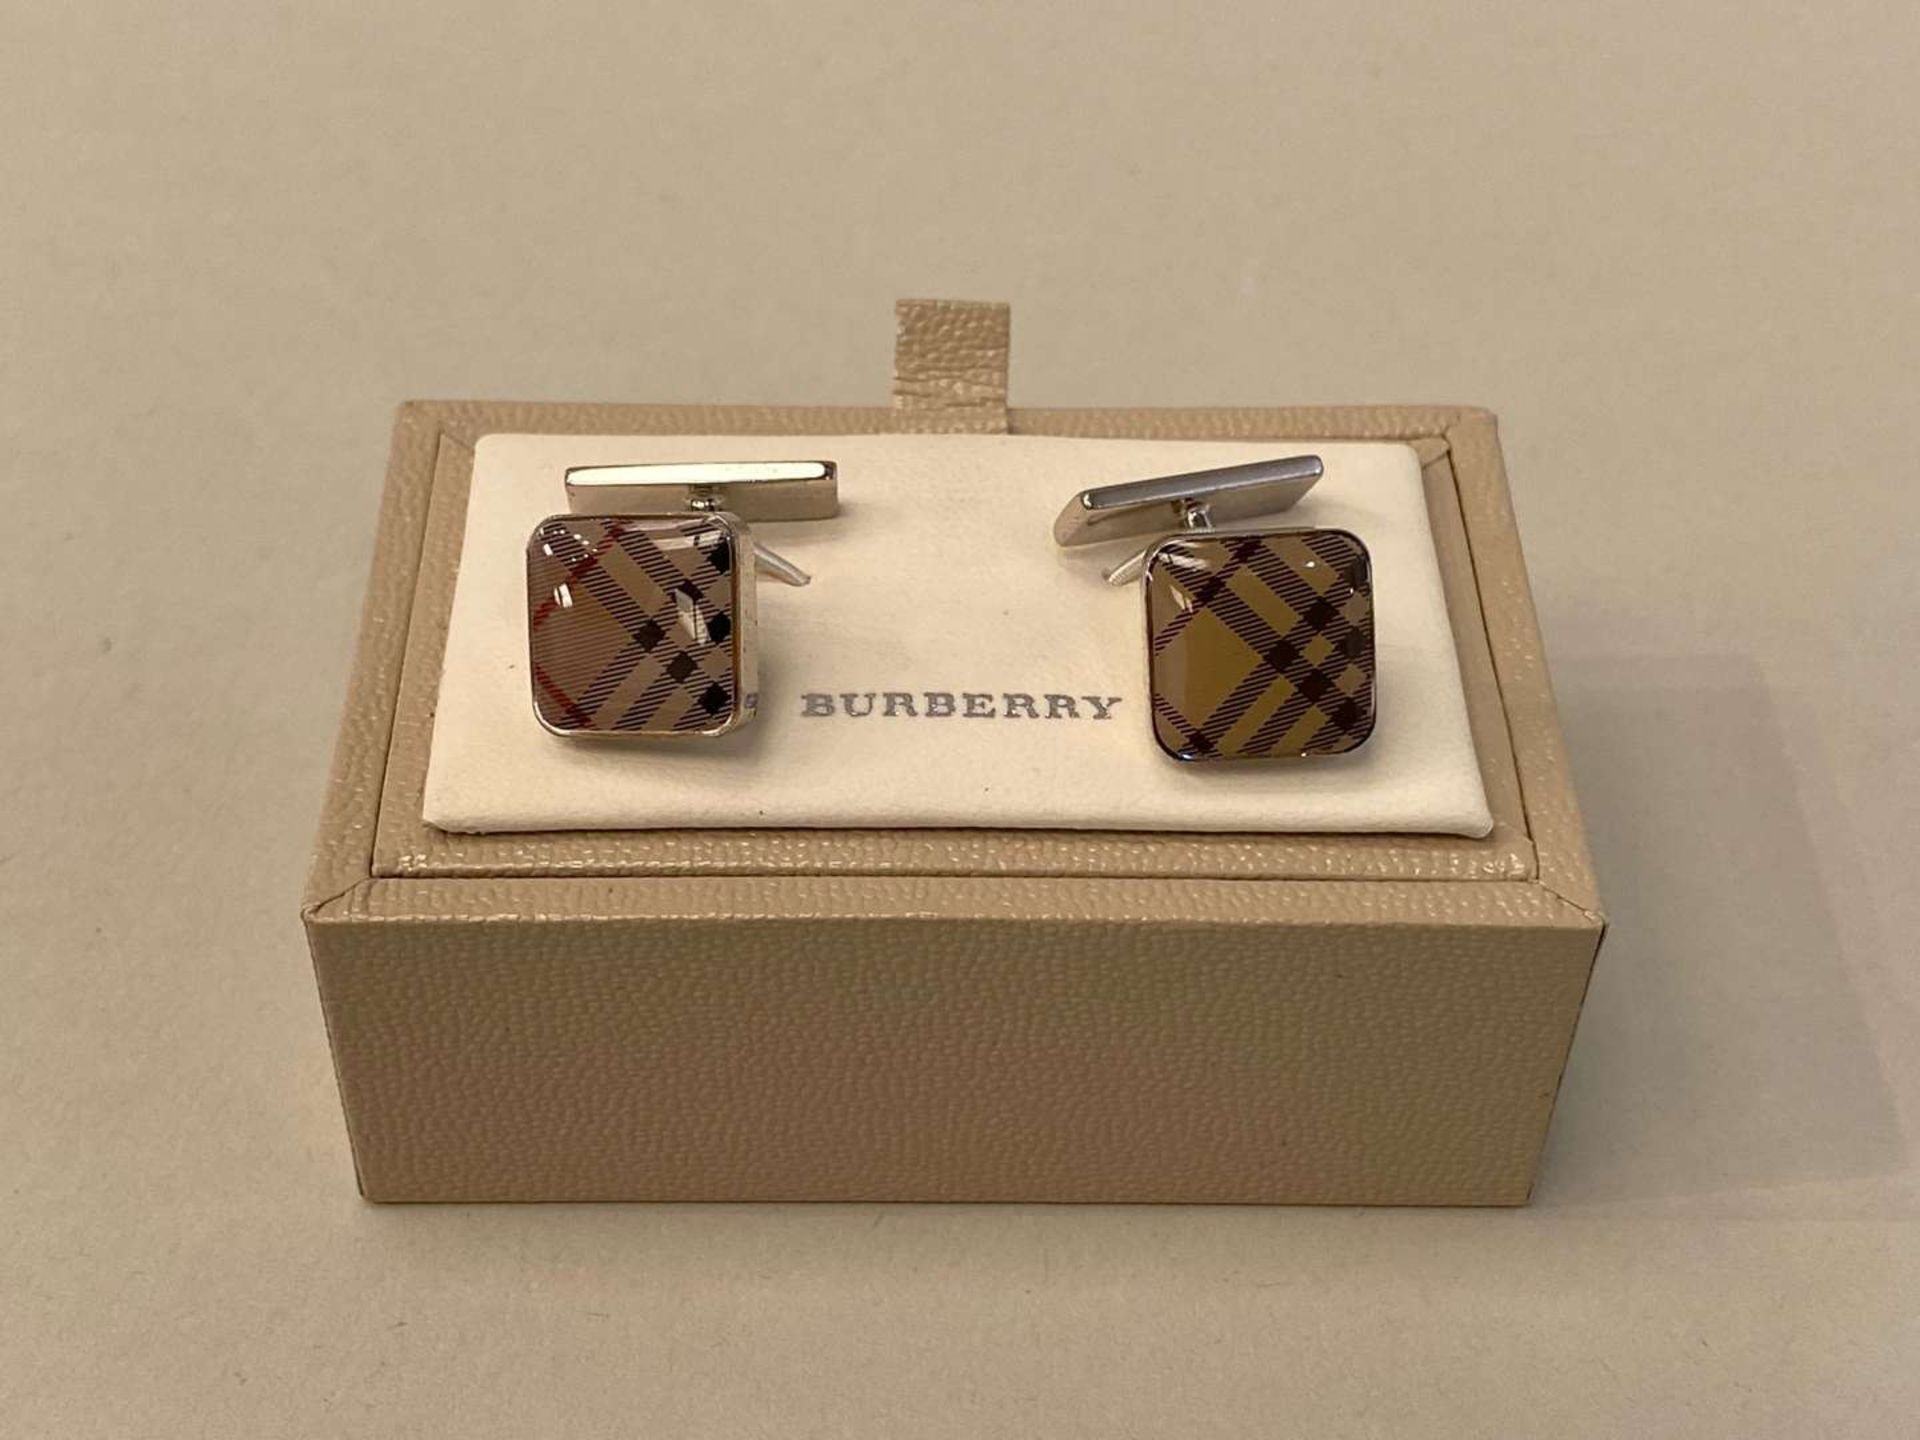 BURBERRY, men's Ostrich, kidskin & cashmere lined gloves, together with a pair of Burberry cufflinks - Image 2 of 4